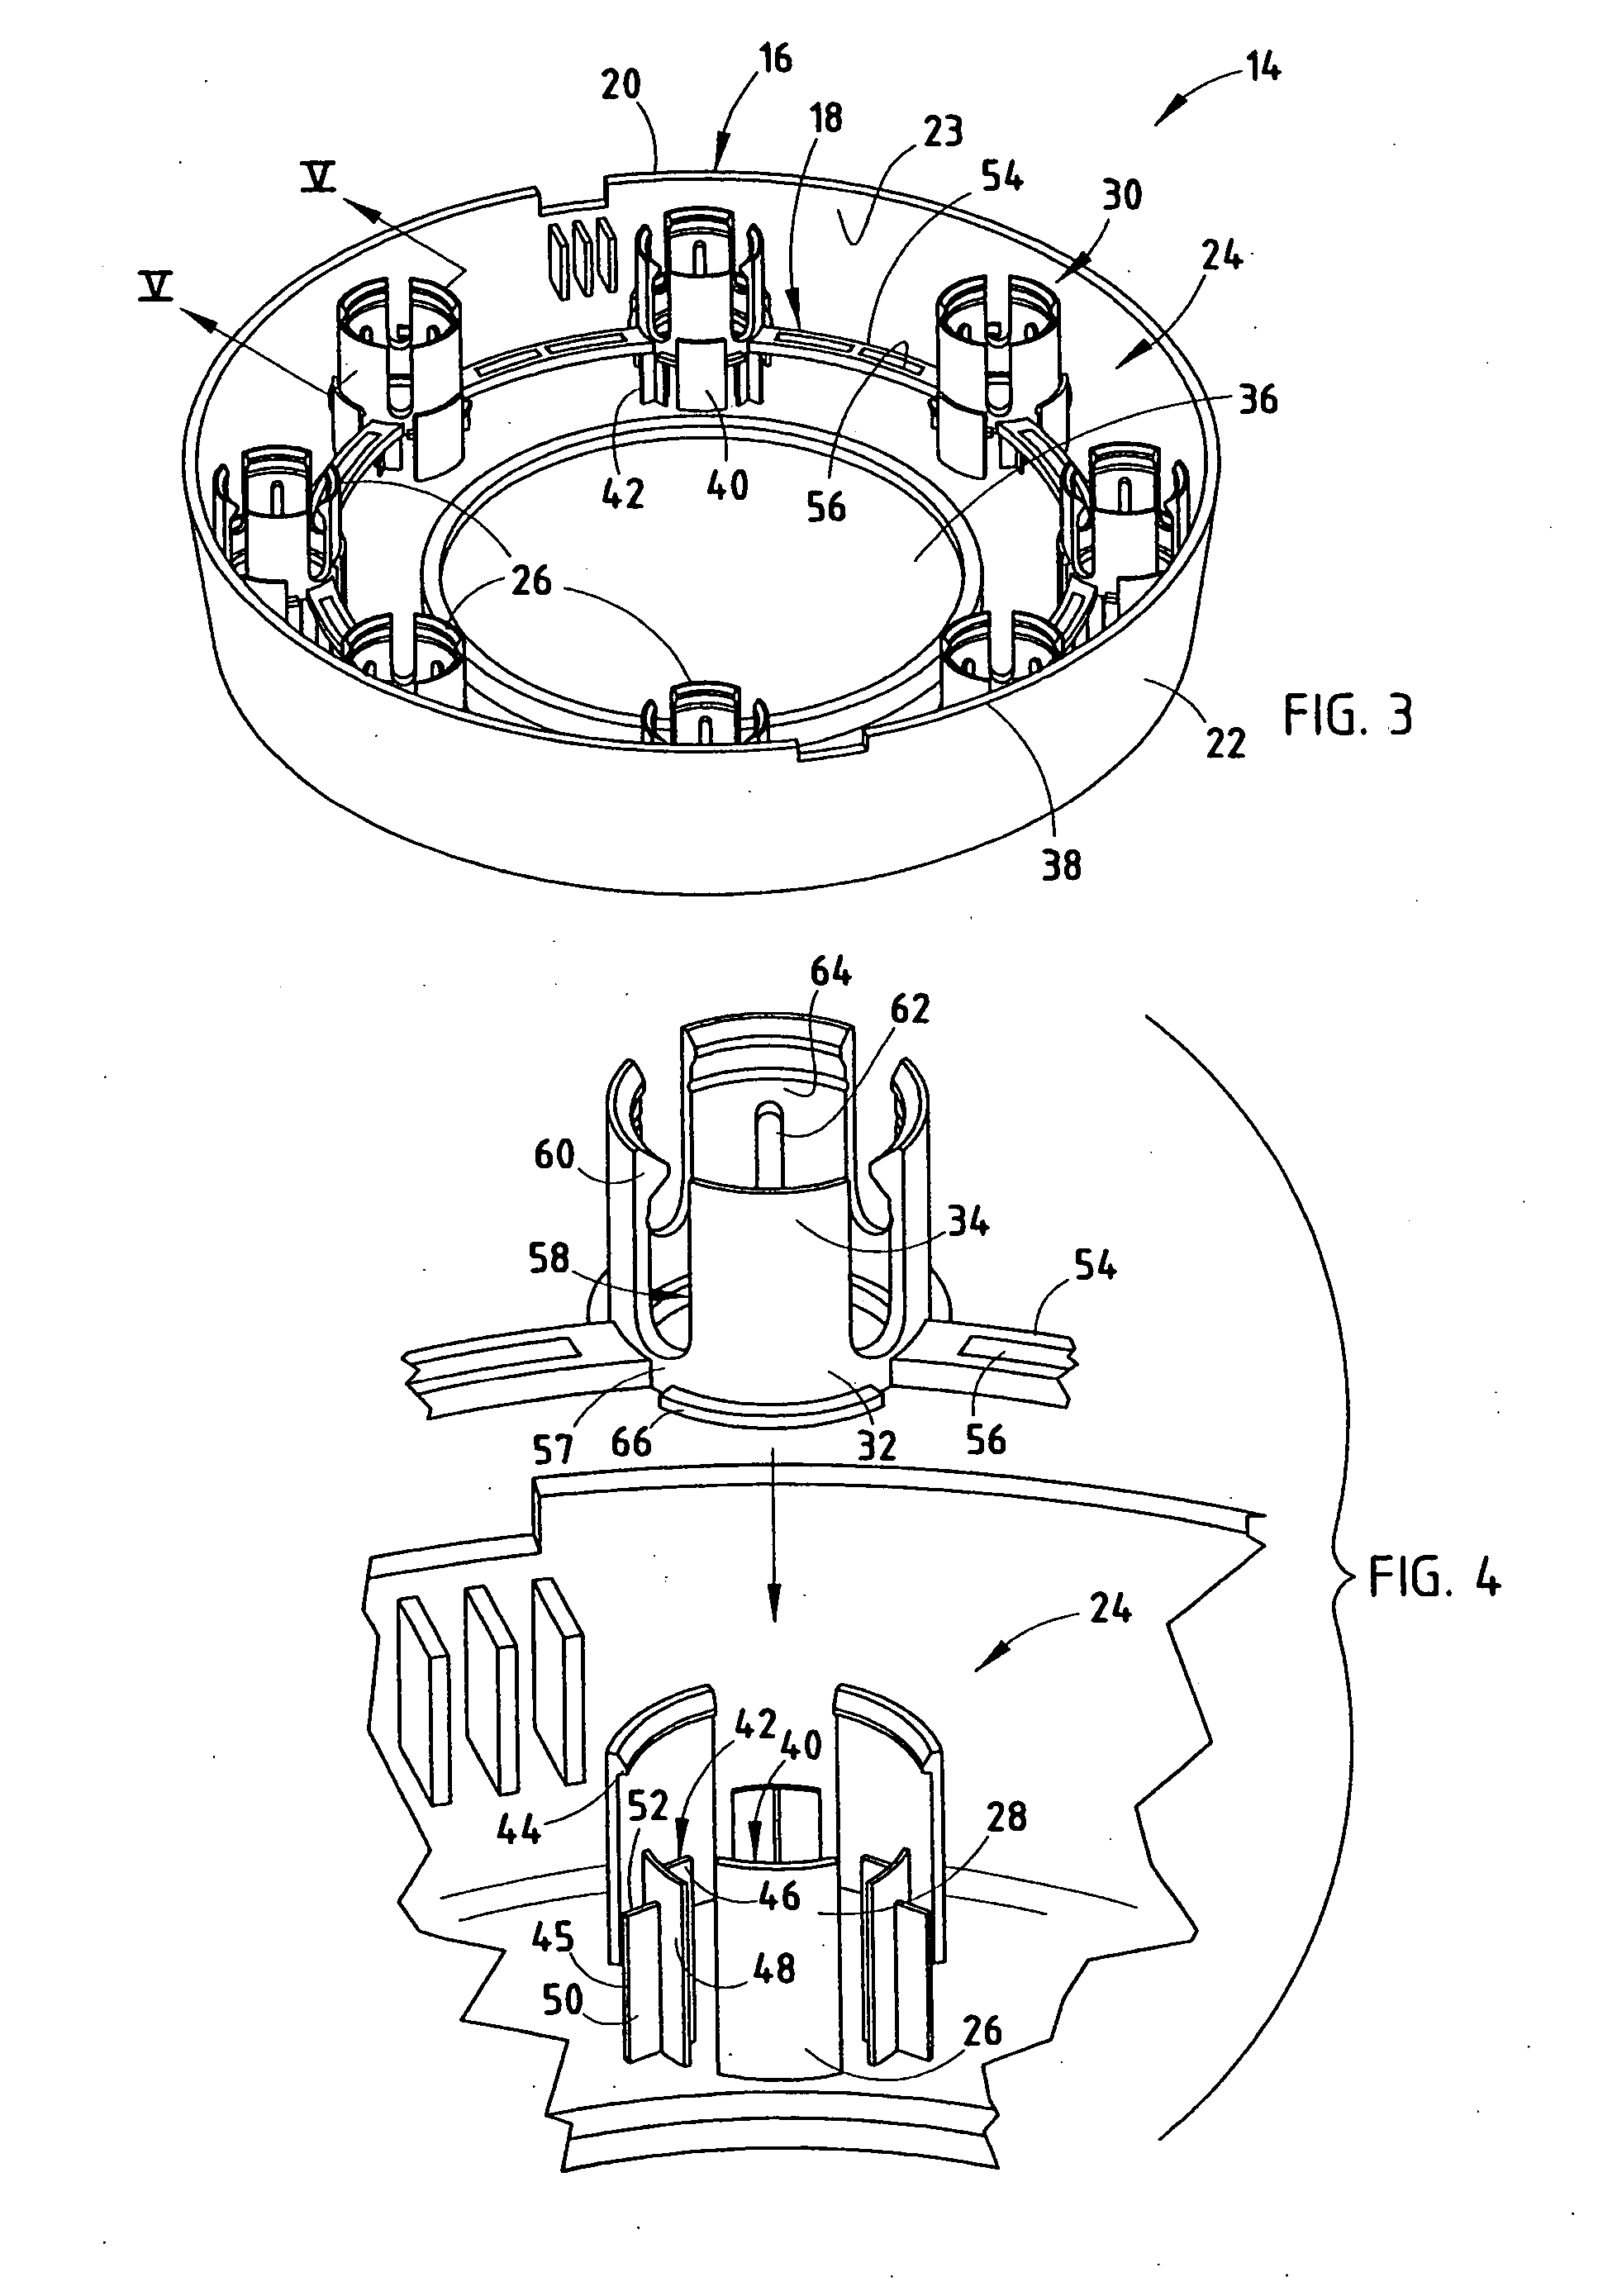 Wheel cap and retainer assembly